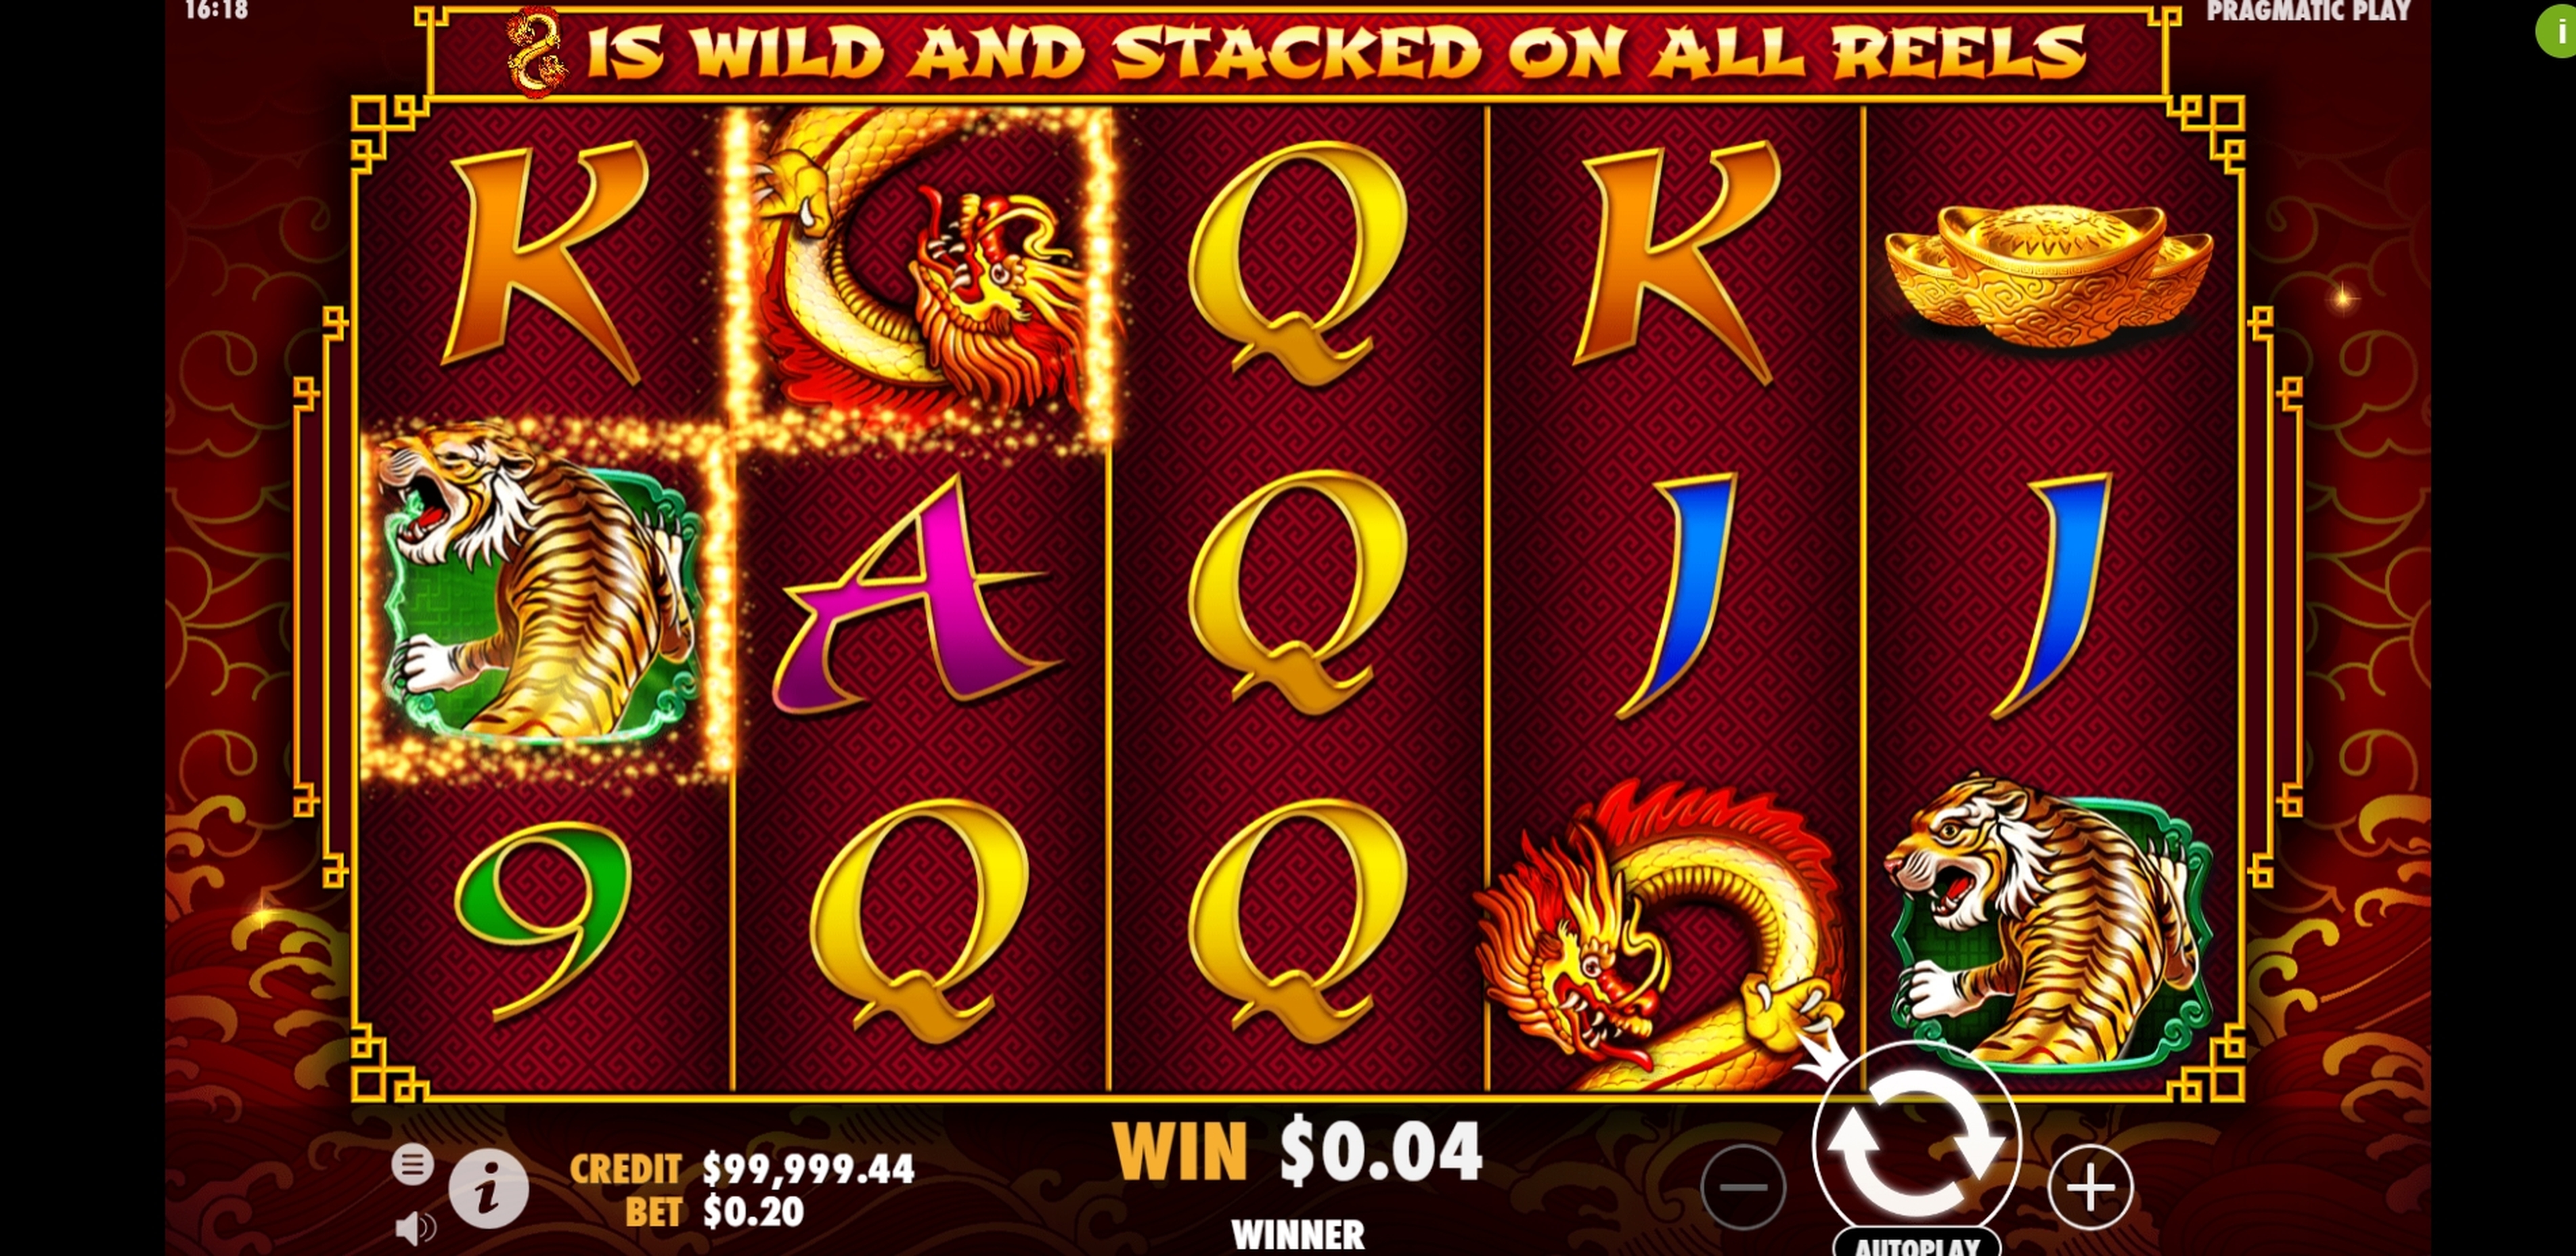 Win Money in 8 Dragons Free Slot Game by Pragmatic Play